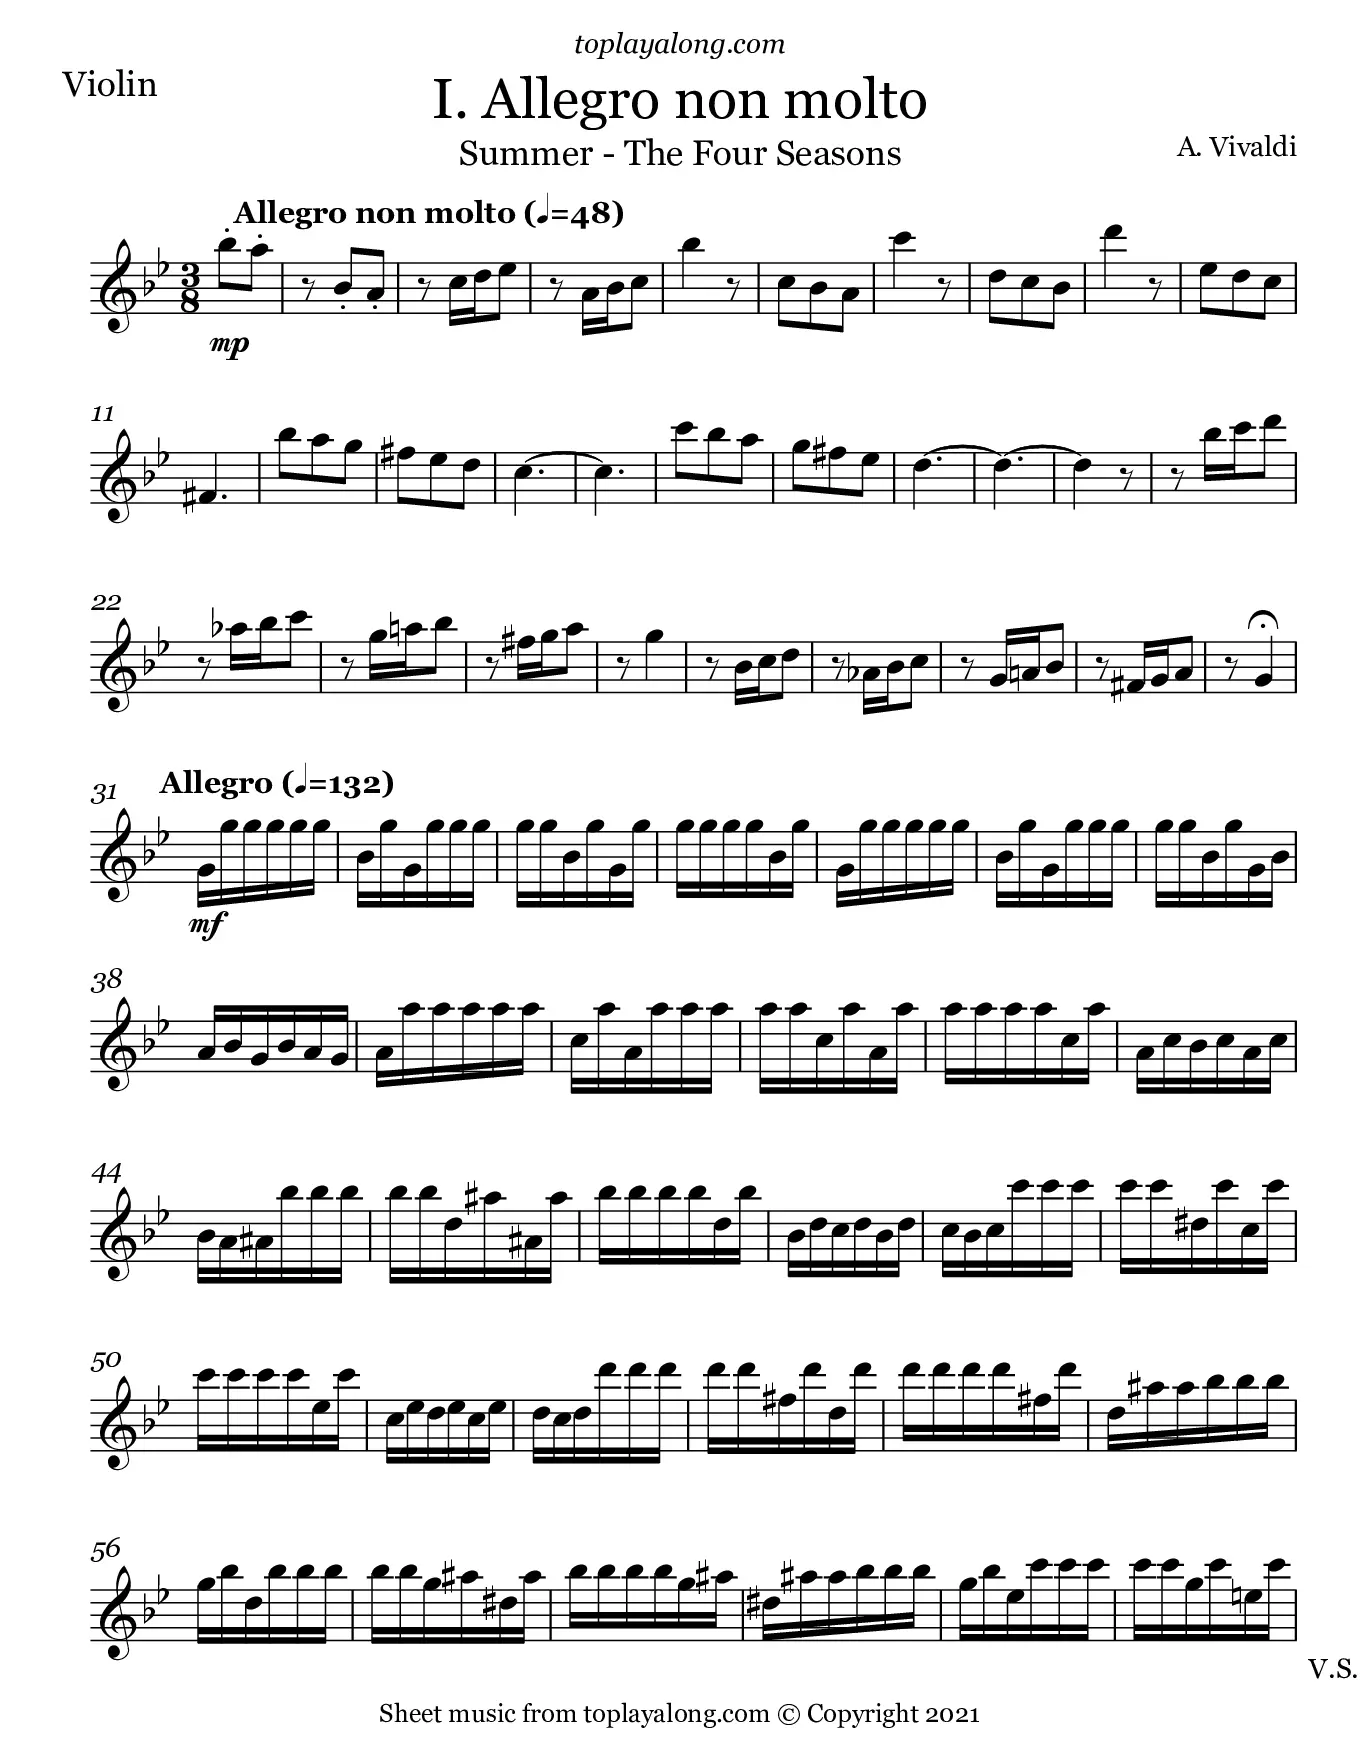 summer partitura violin - What is the meaning behind The Four Seasons